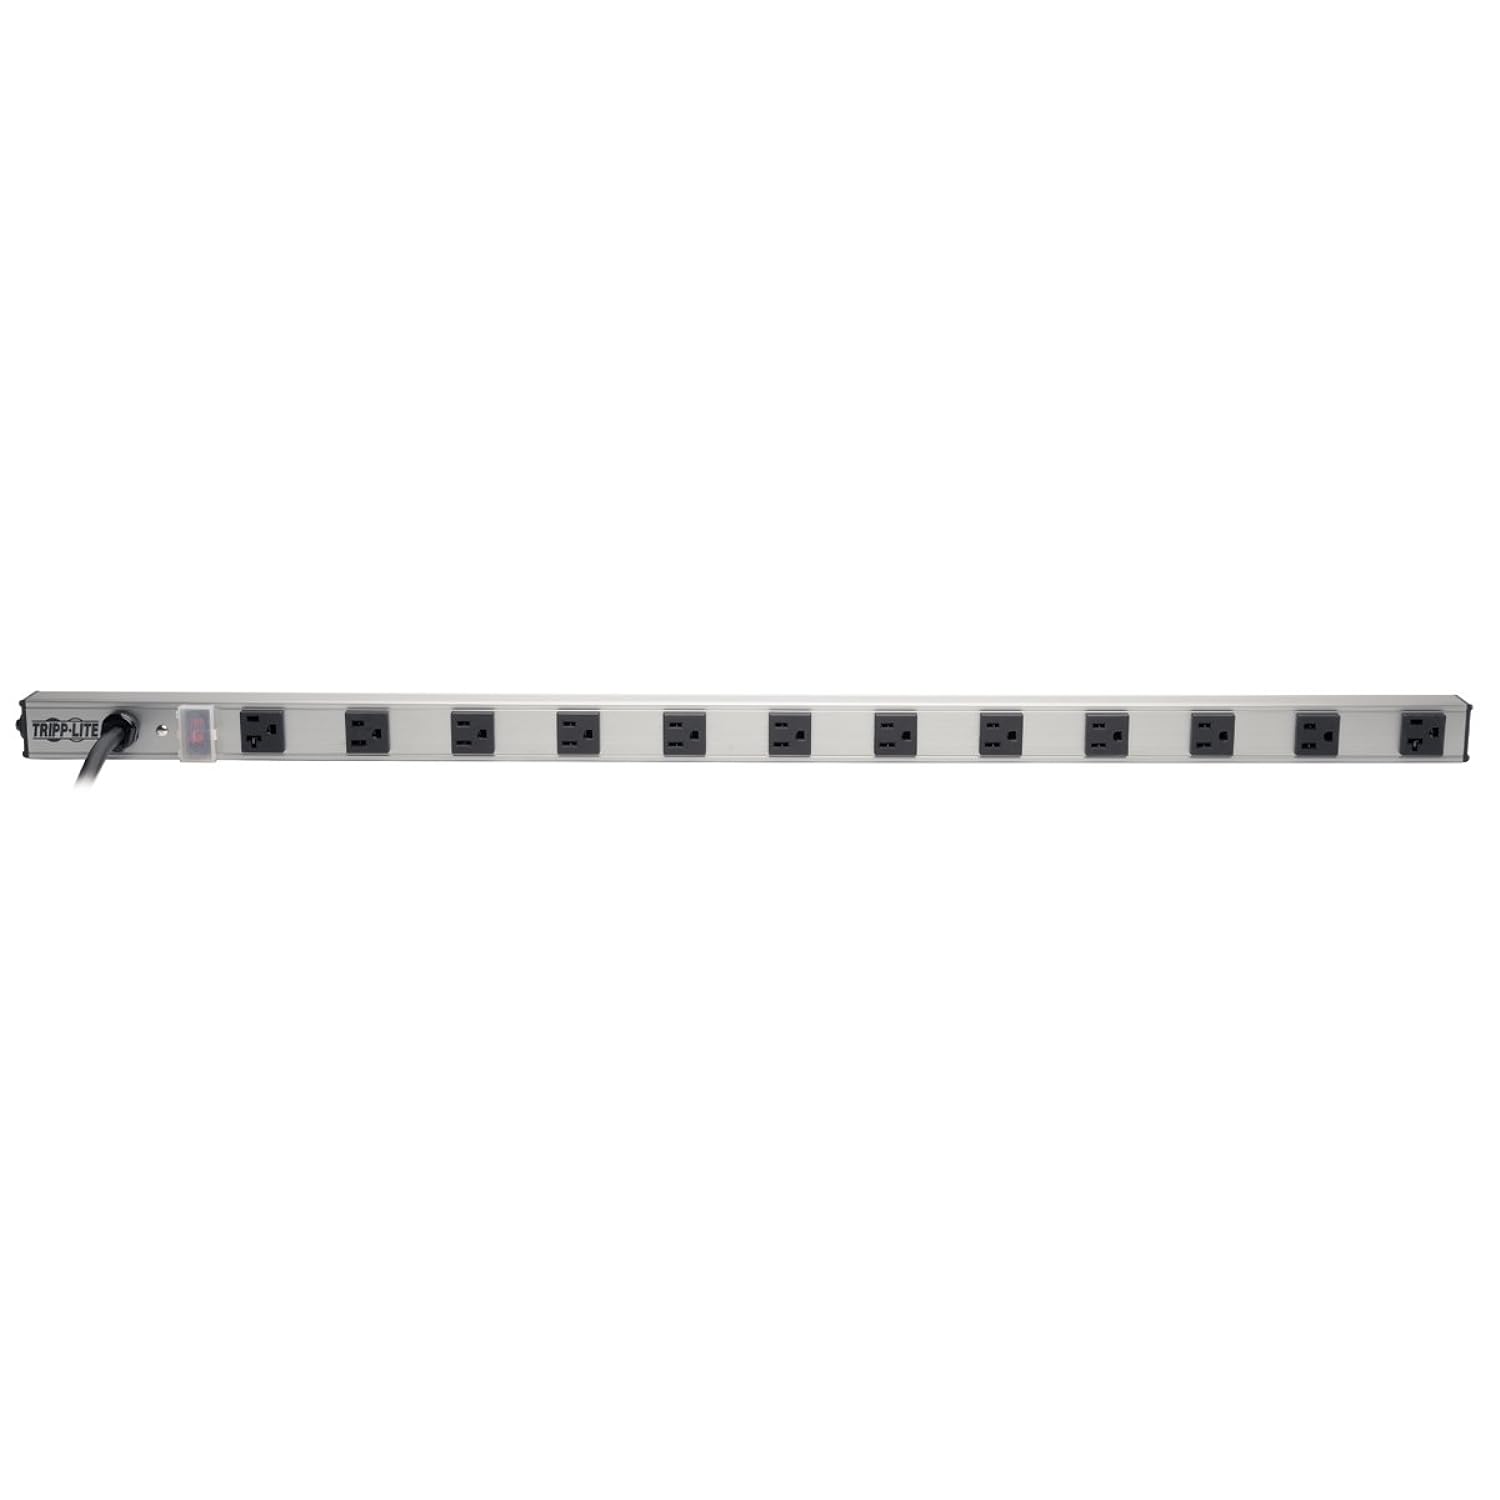 Tripp Lite 12 Outlet Surge Protector Power Strip, 15ft Long Cord, Metal, (SS361220) Black/Gray